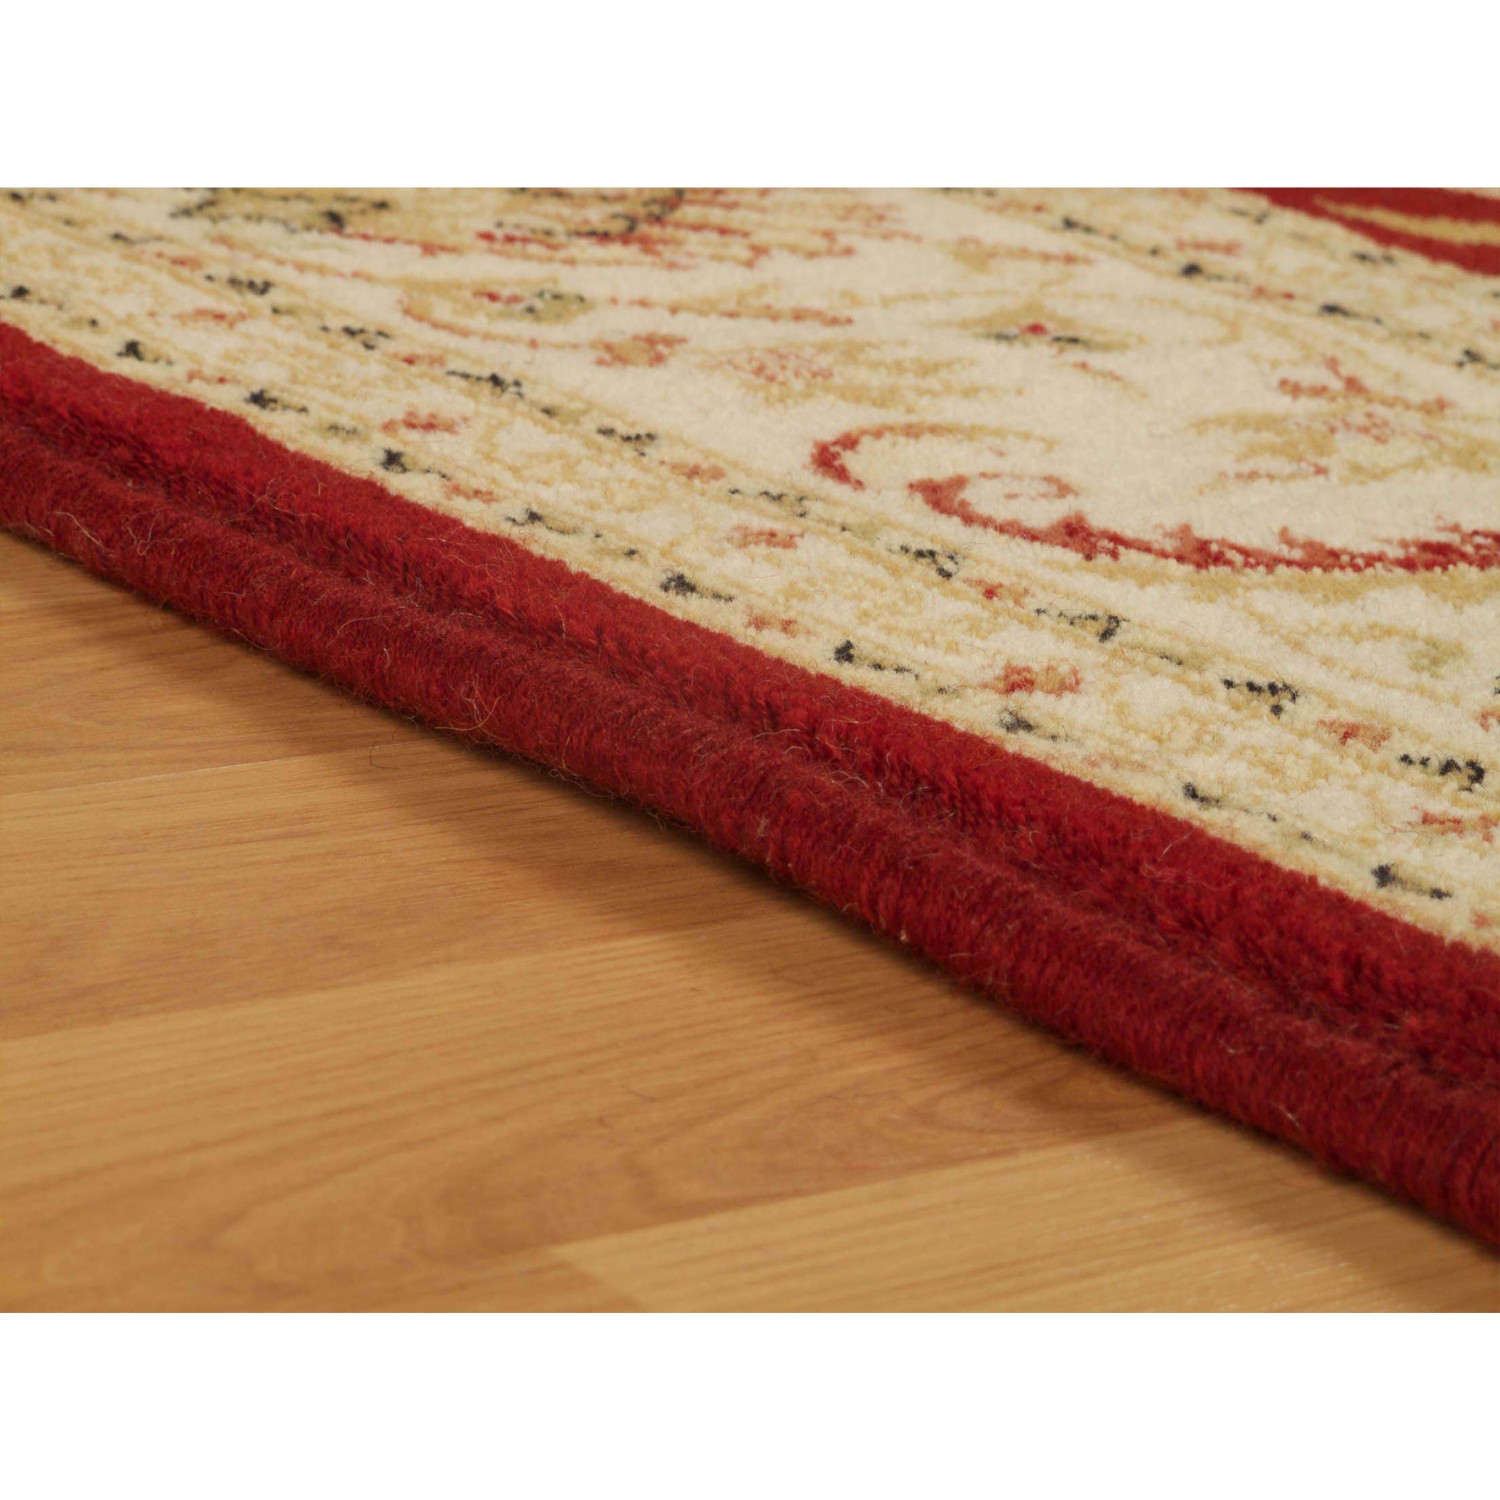 Royal Classic Traditional Rug - 636R Red Gold